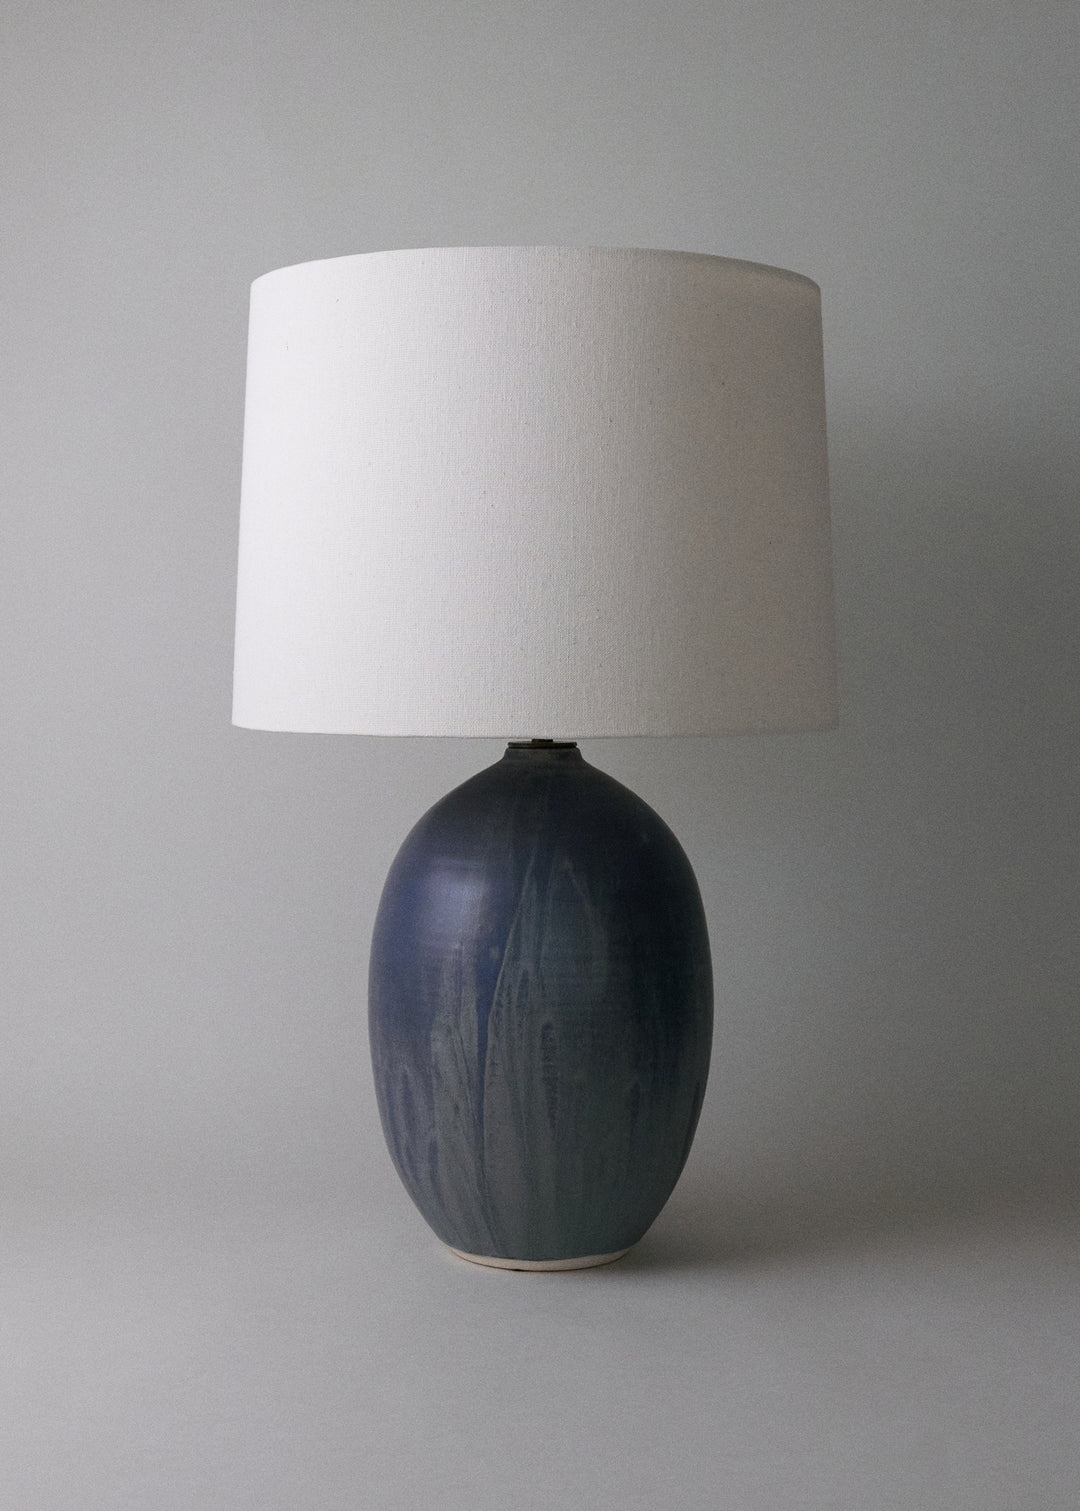 Large Oval Lamp in Atlantic Blue - Victoria Morris Pottery